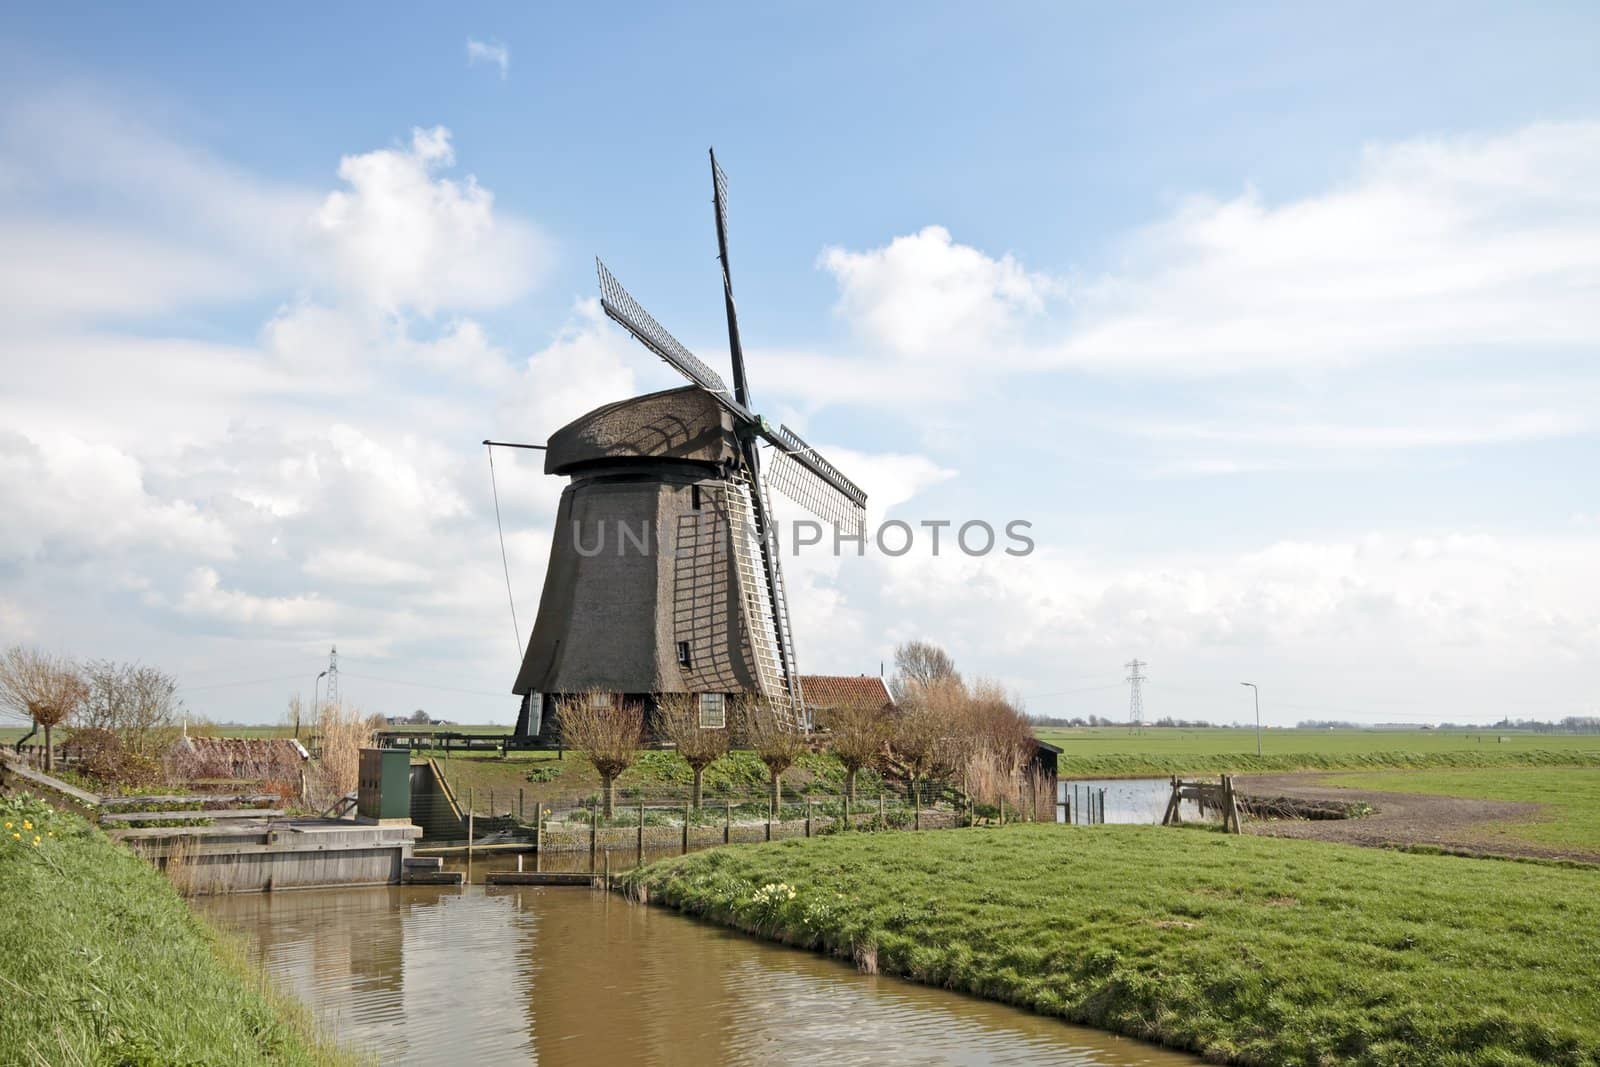 traditional windmill in dutch landscape in the Netherlands